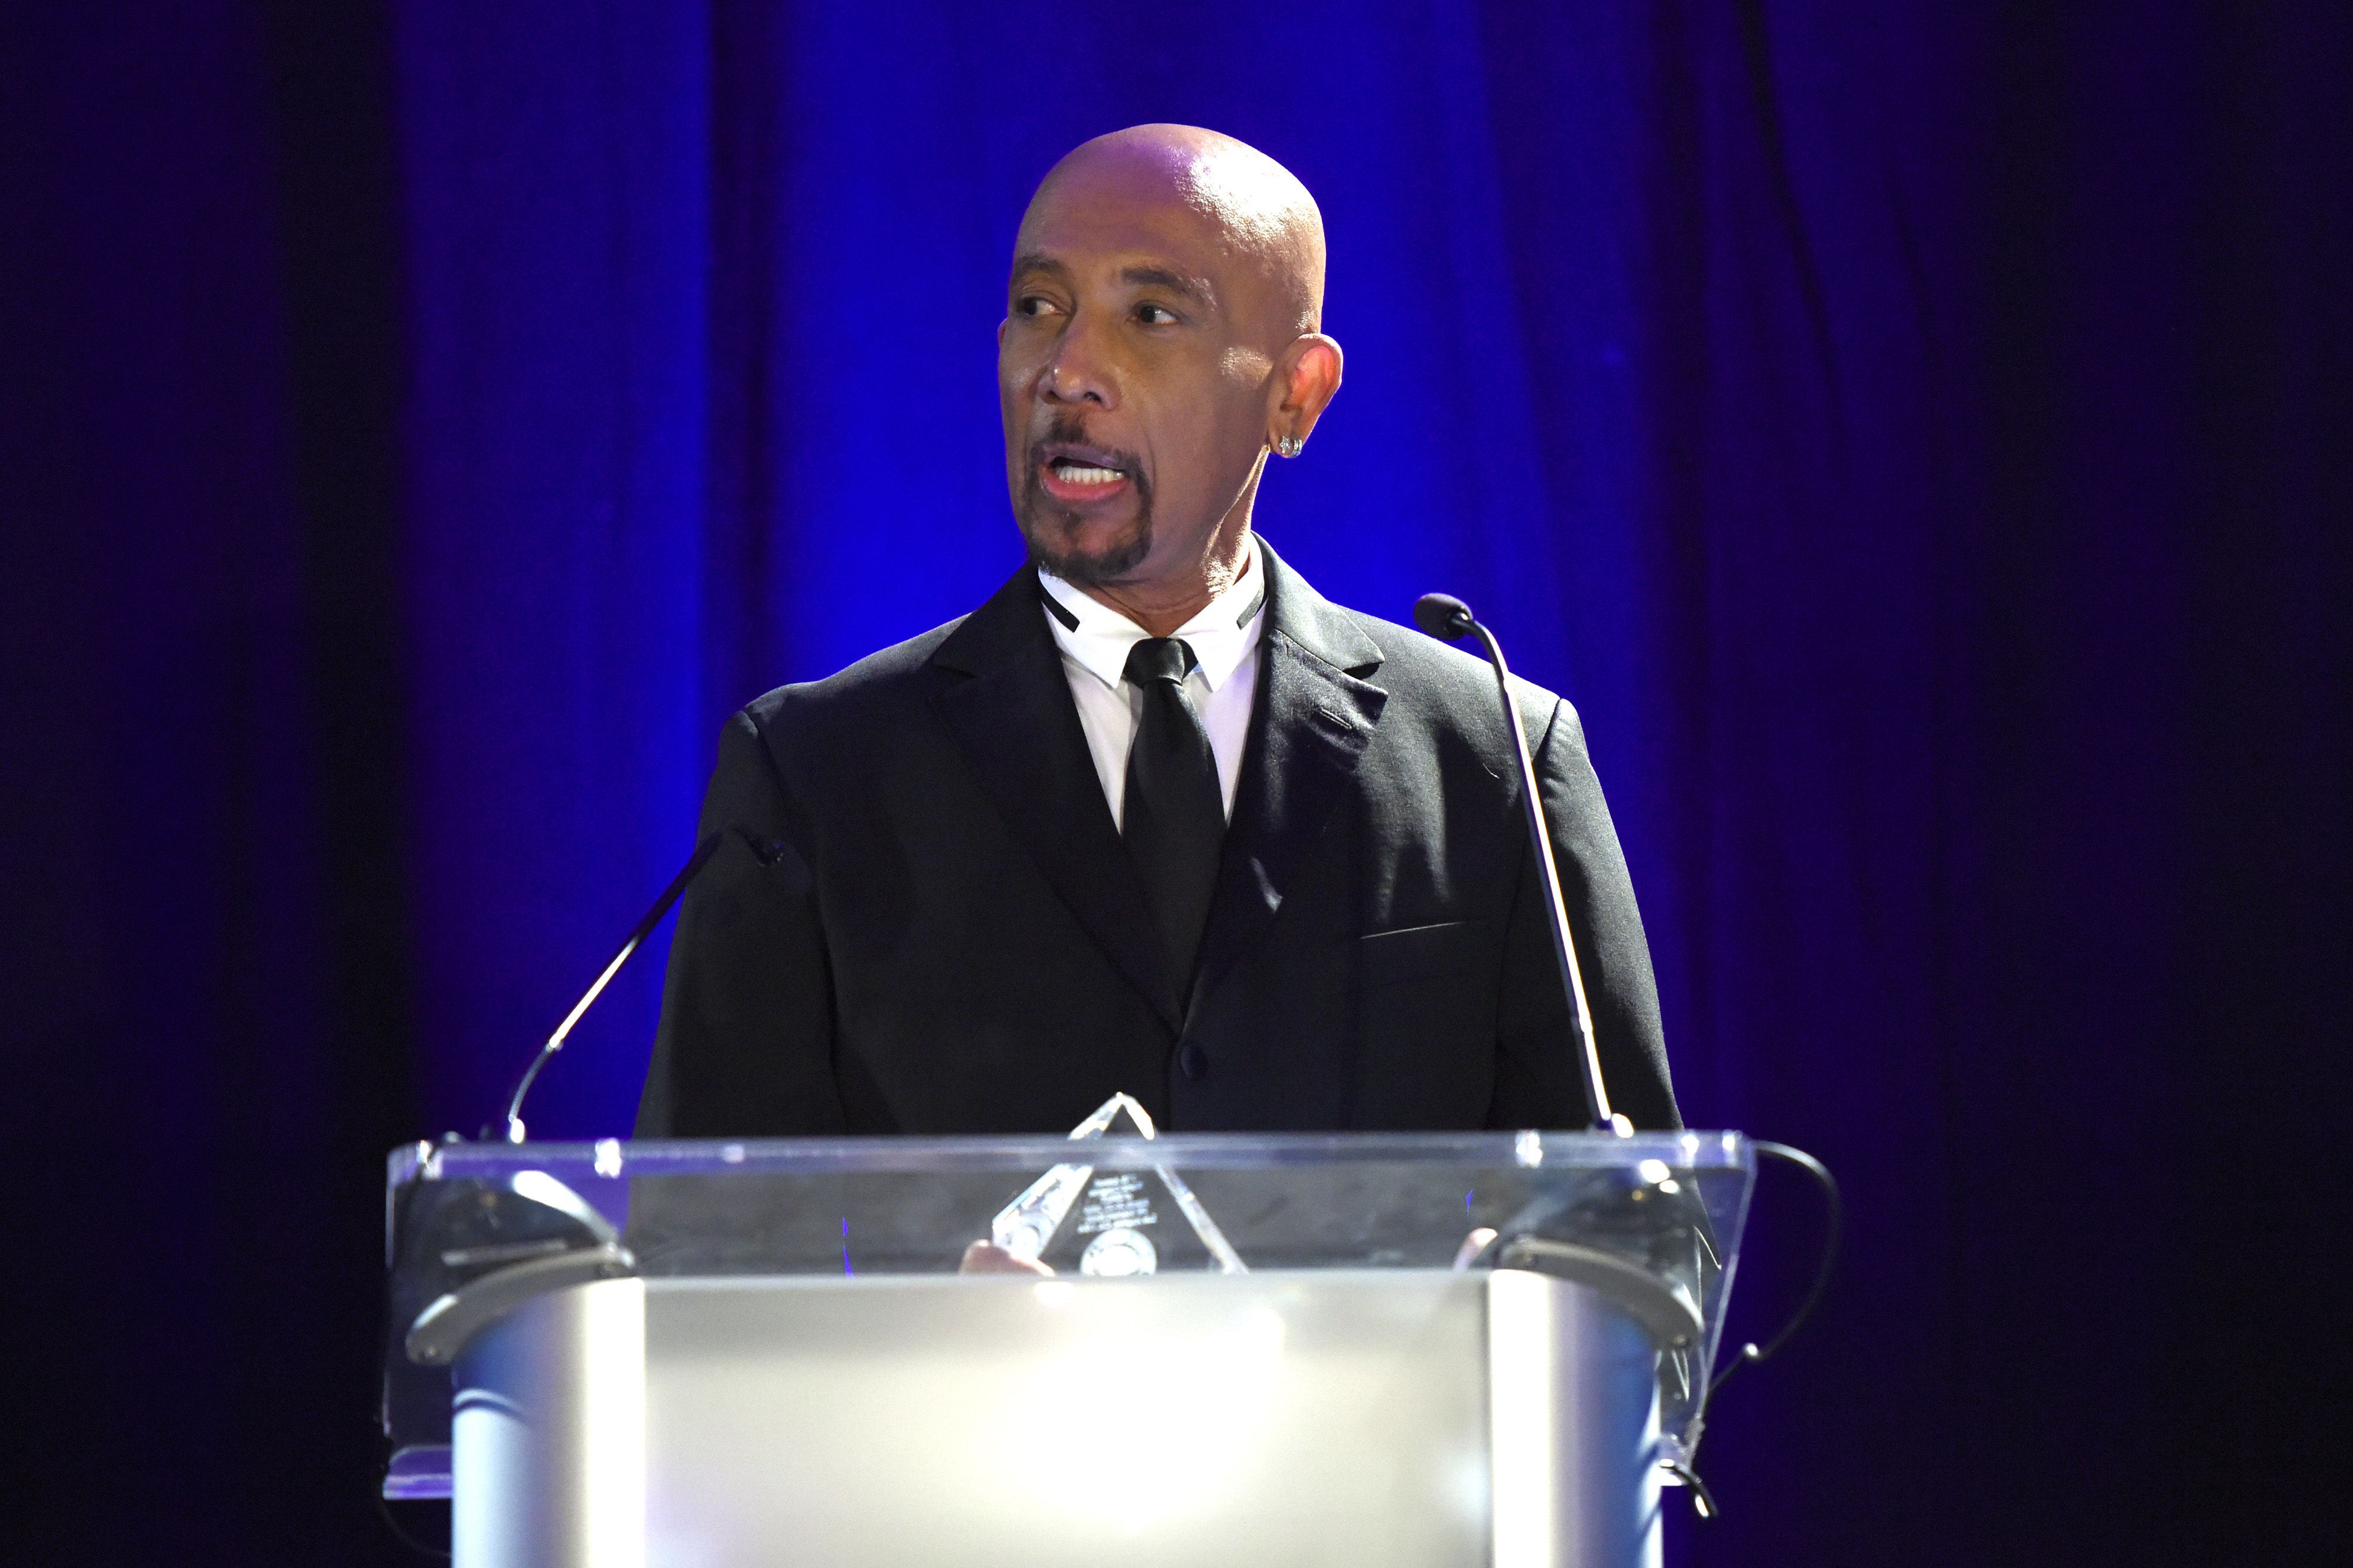 Montel Williams Had I not been vaccinated, "I might not be talking to